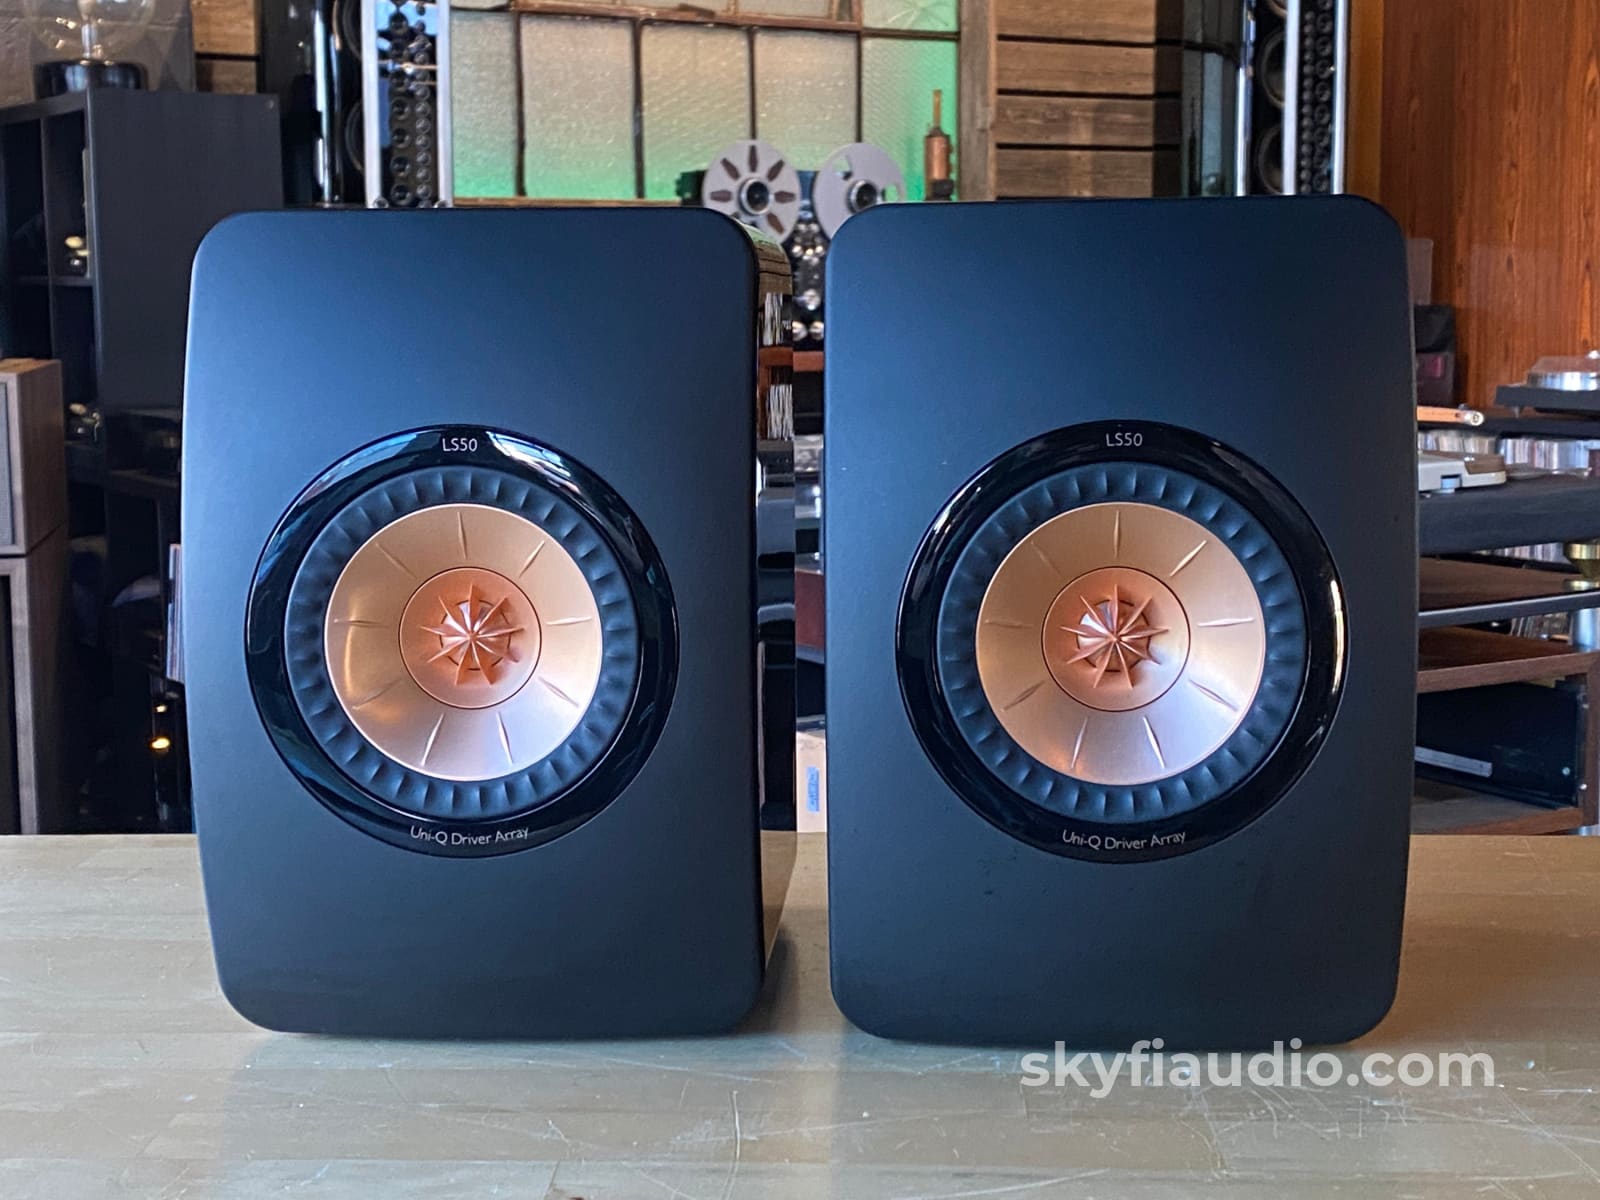 Kef Ls50 Bookshelf Speakers - Highly Reviewed Stereophile Class A